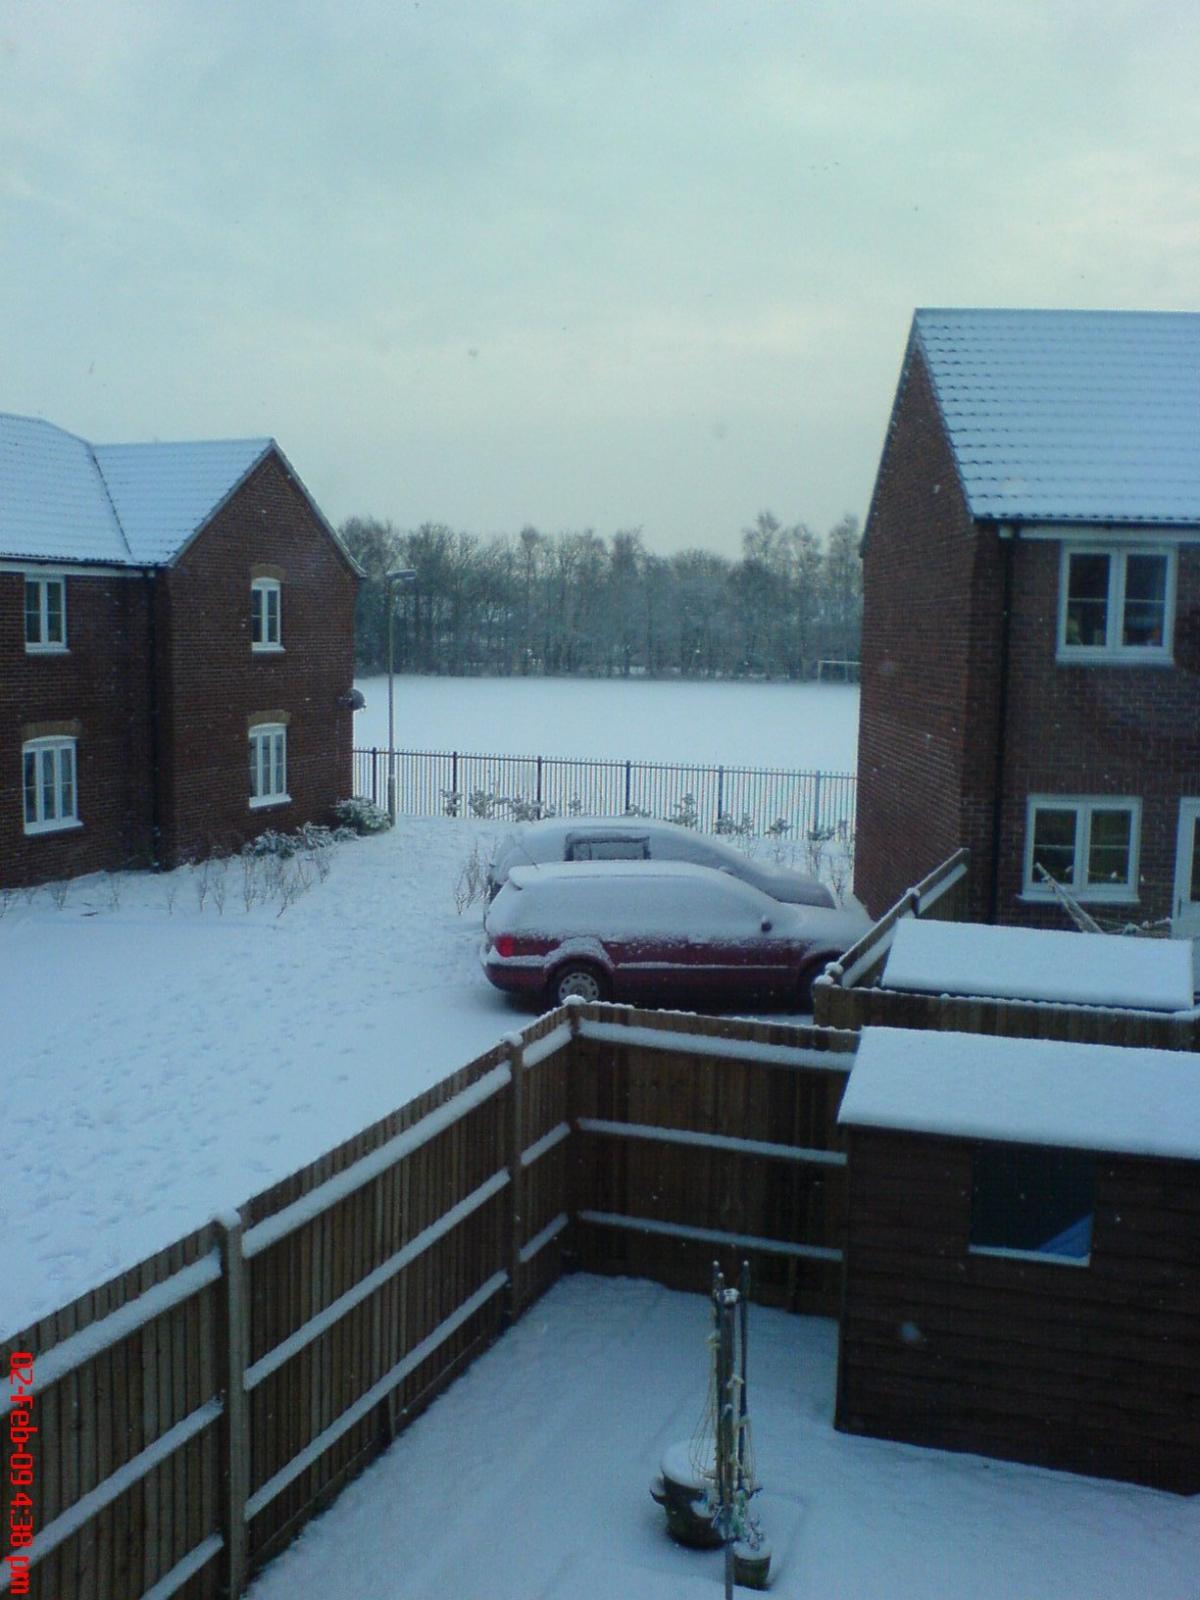 Crestwood View, Eastleigh by Echo reader Angel